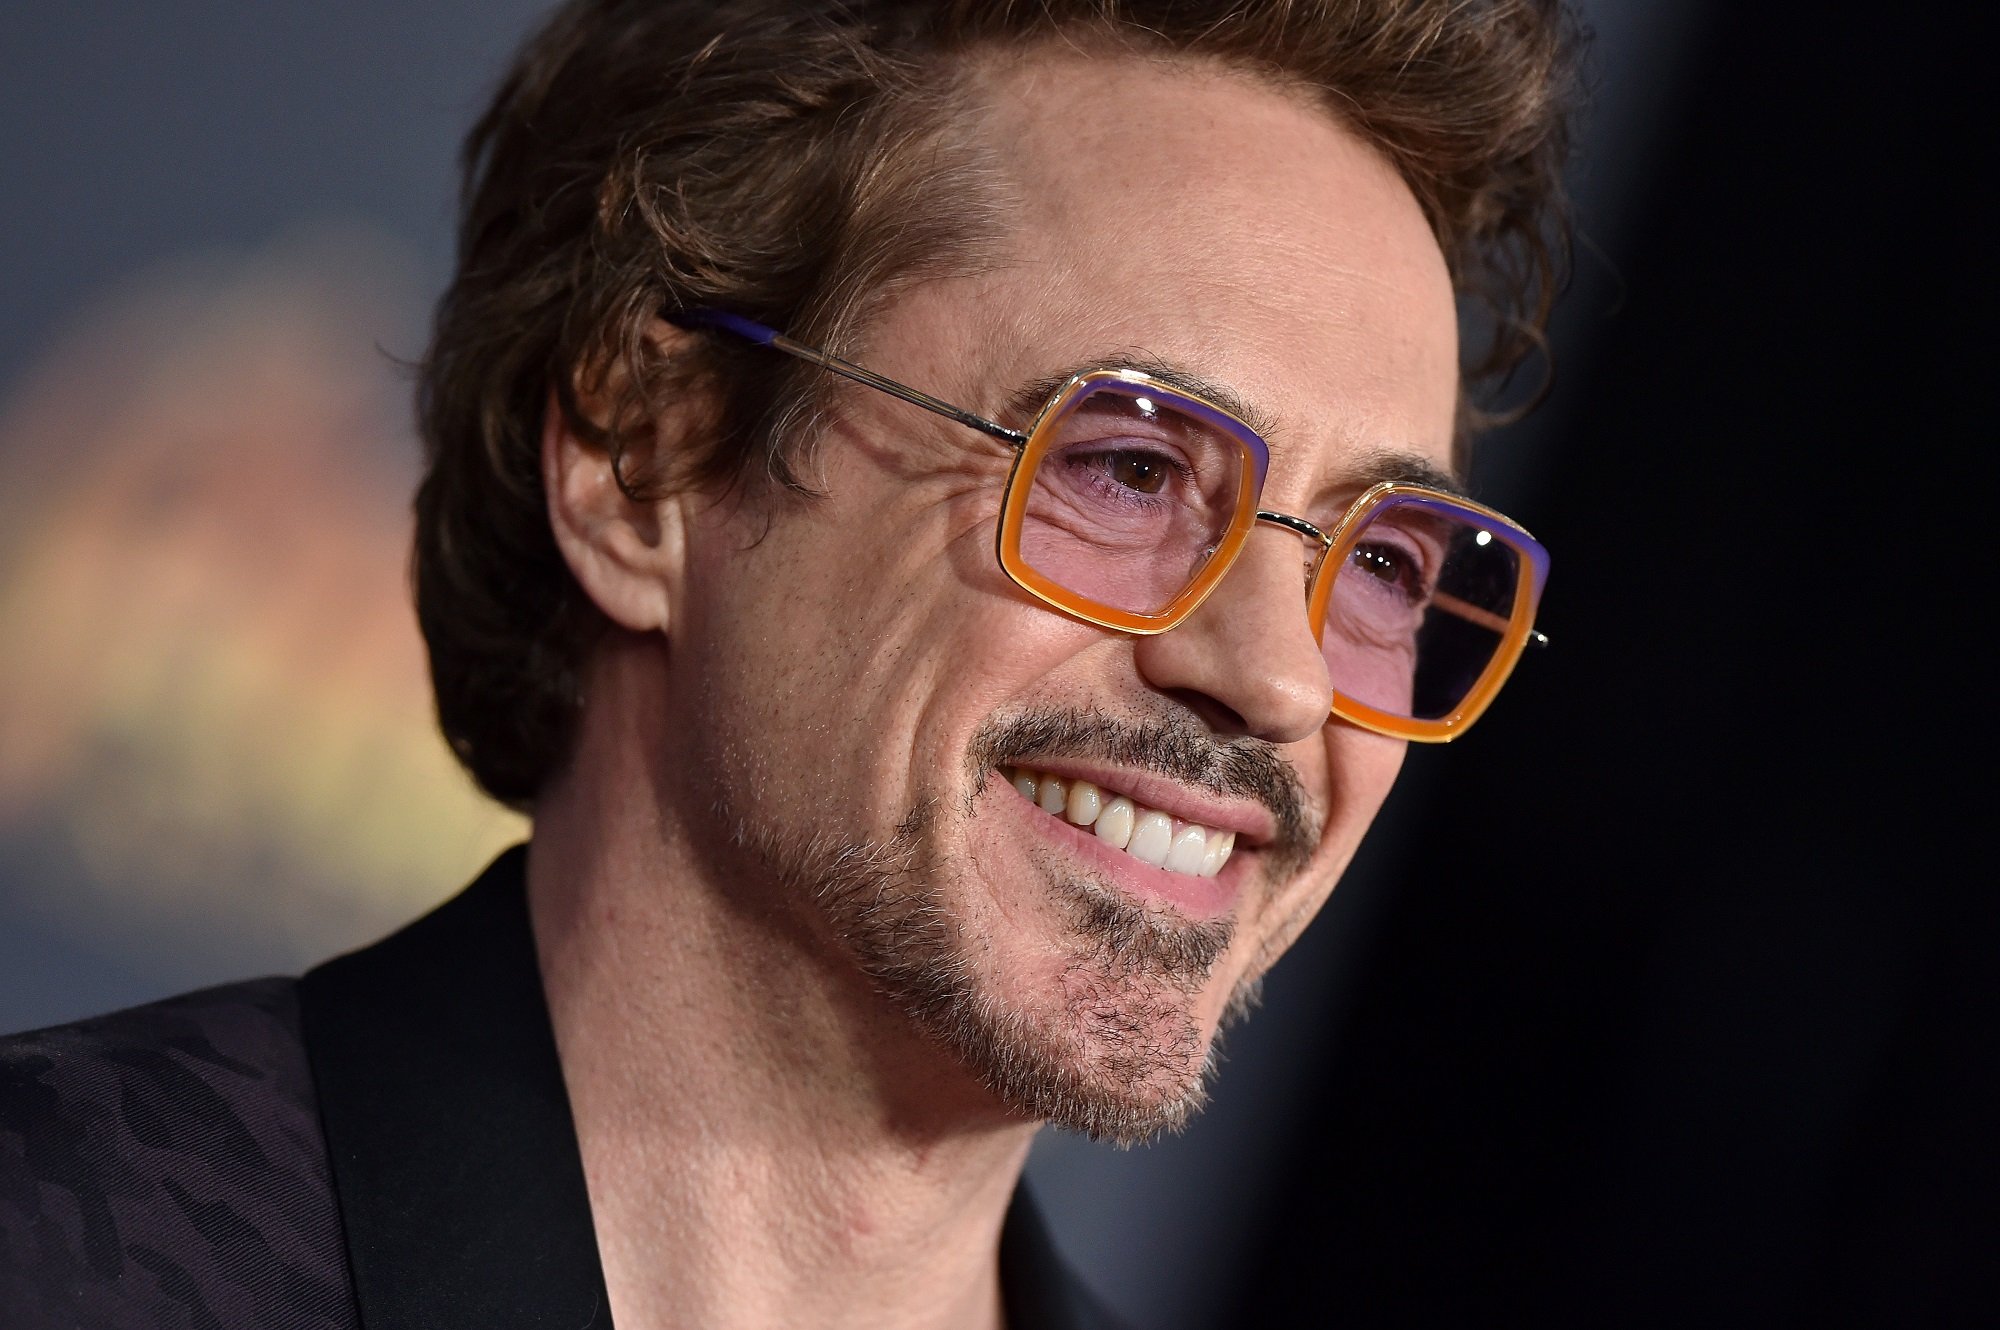 Robert Downey Jr. attends the premiere of Disney and Marvel's 'Avengers: Infinity War' on April 23, 2018 in Hollywood, California.